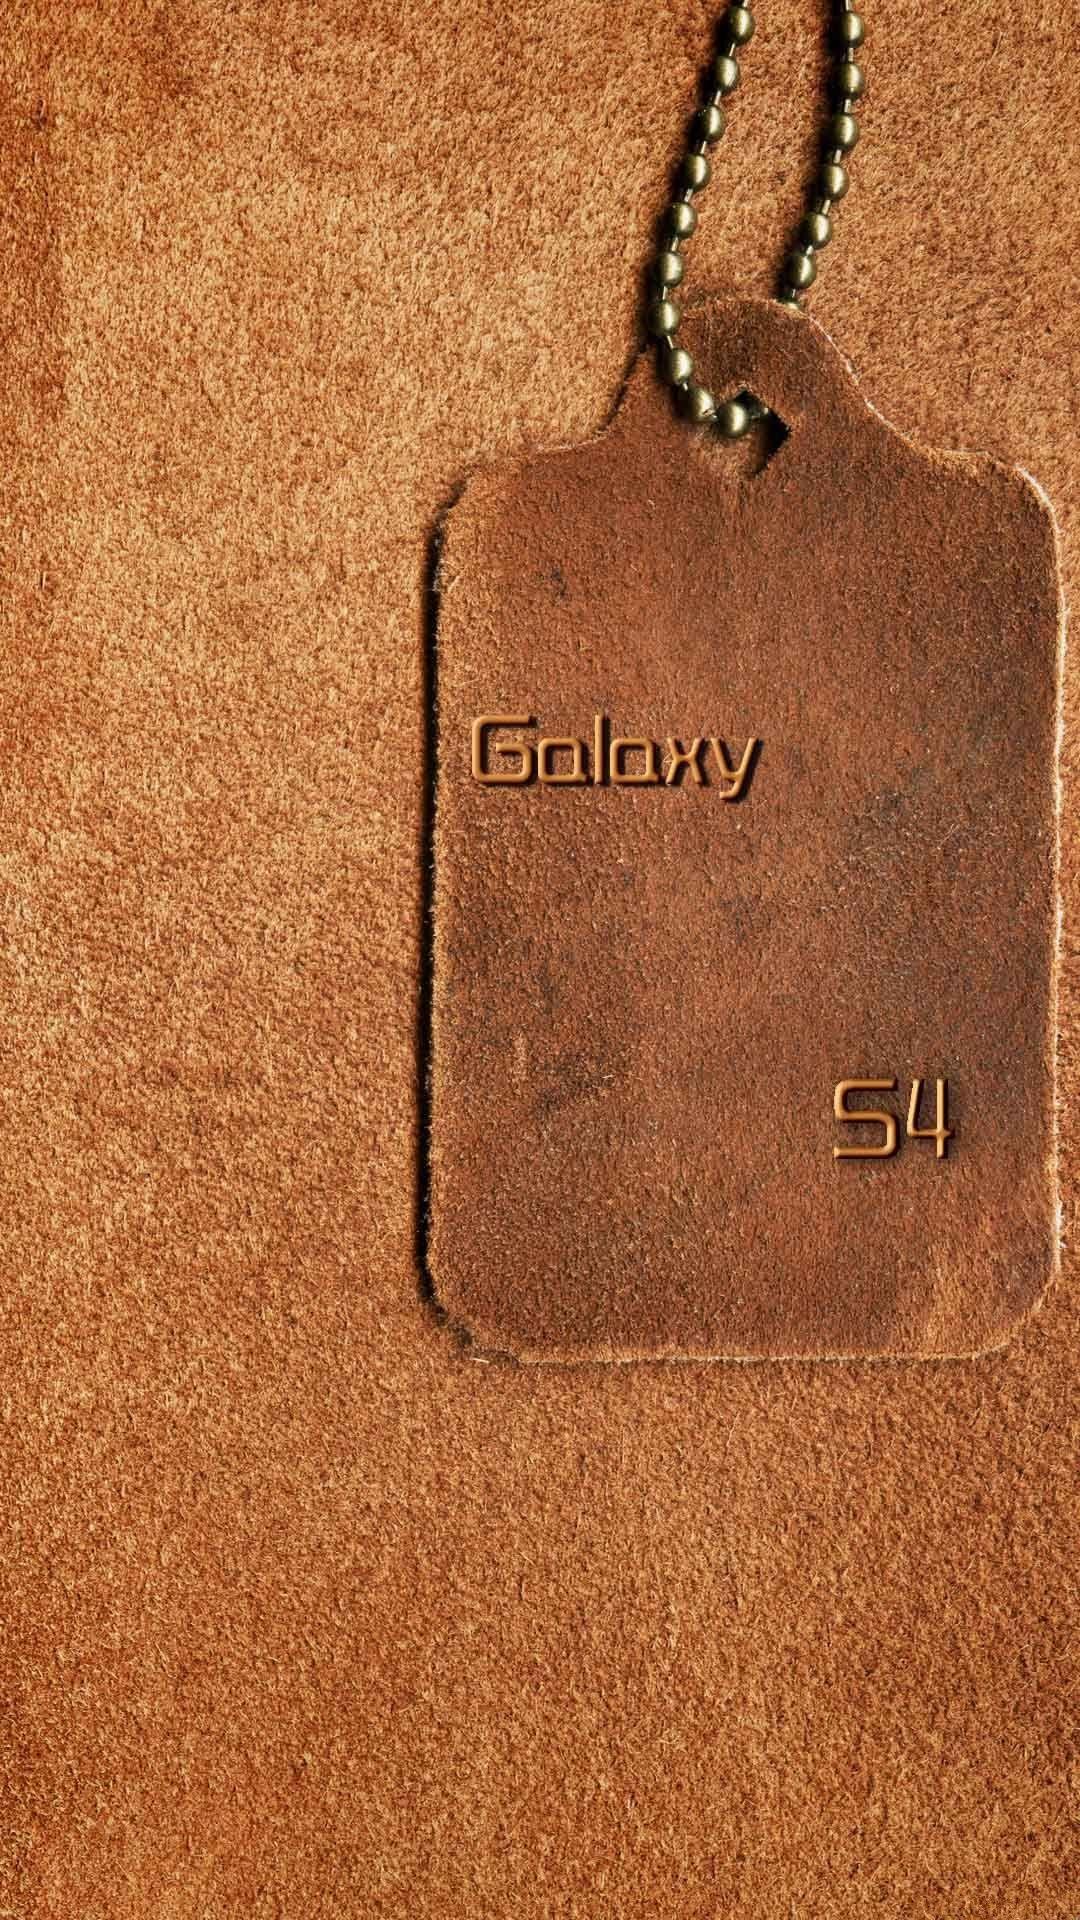 Galaxy S4 Bronze Dog Tags Android Wallpaper free download